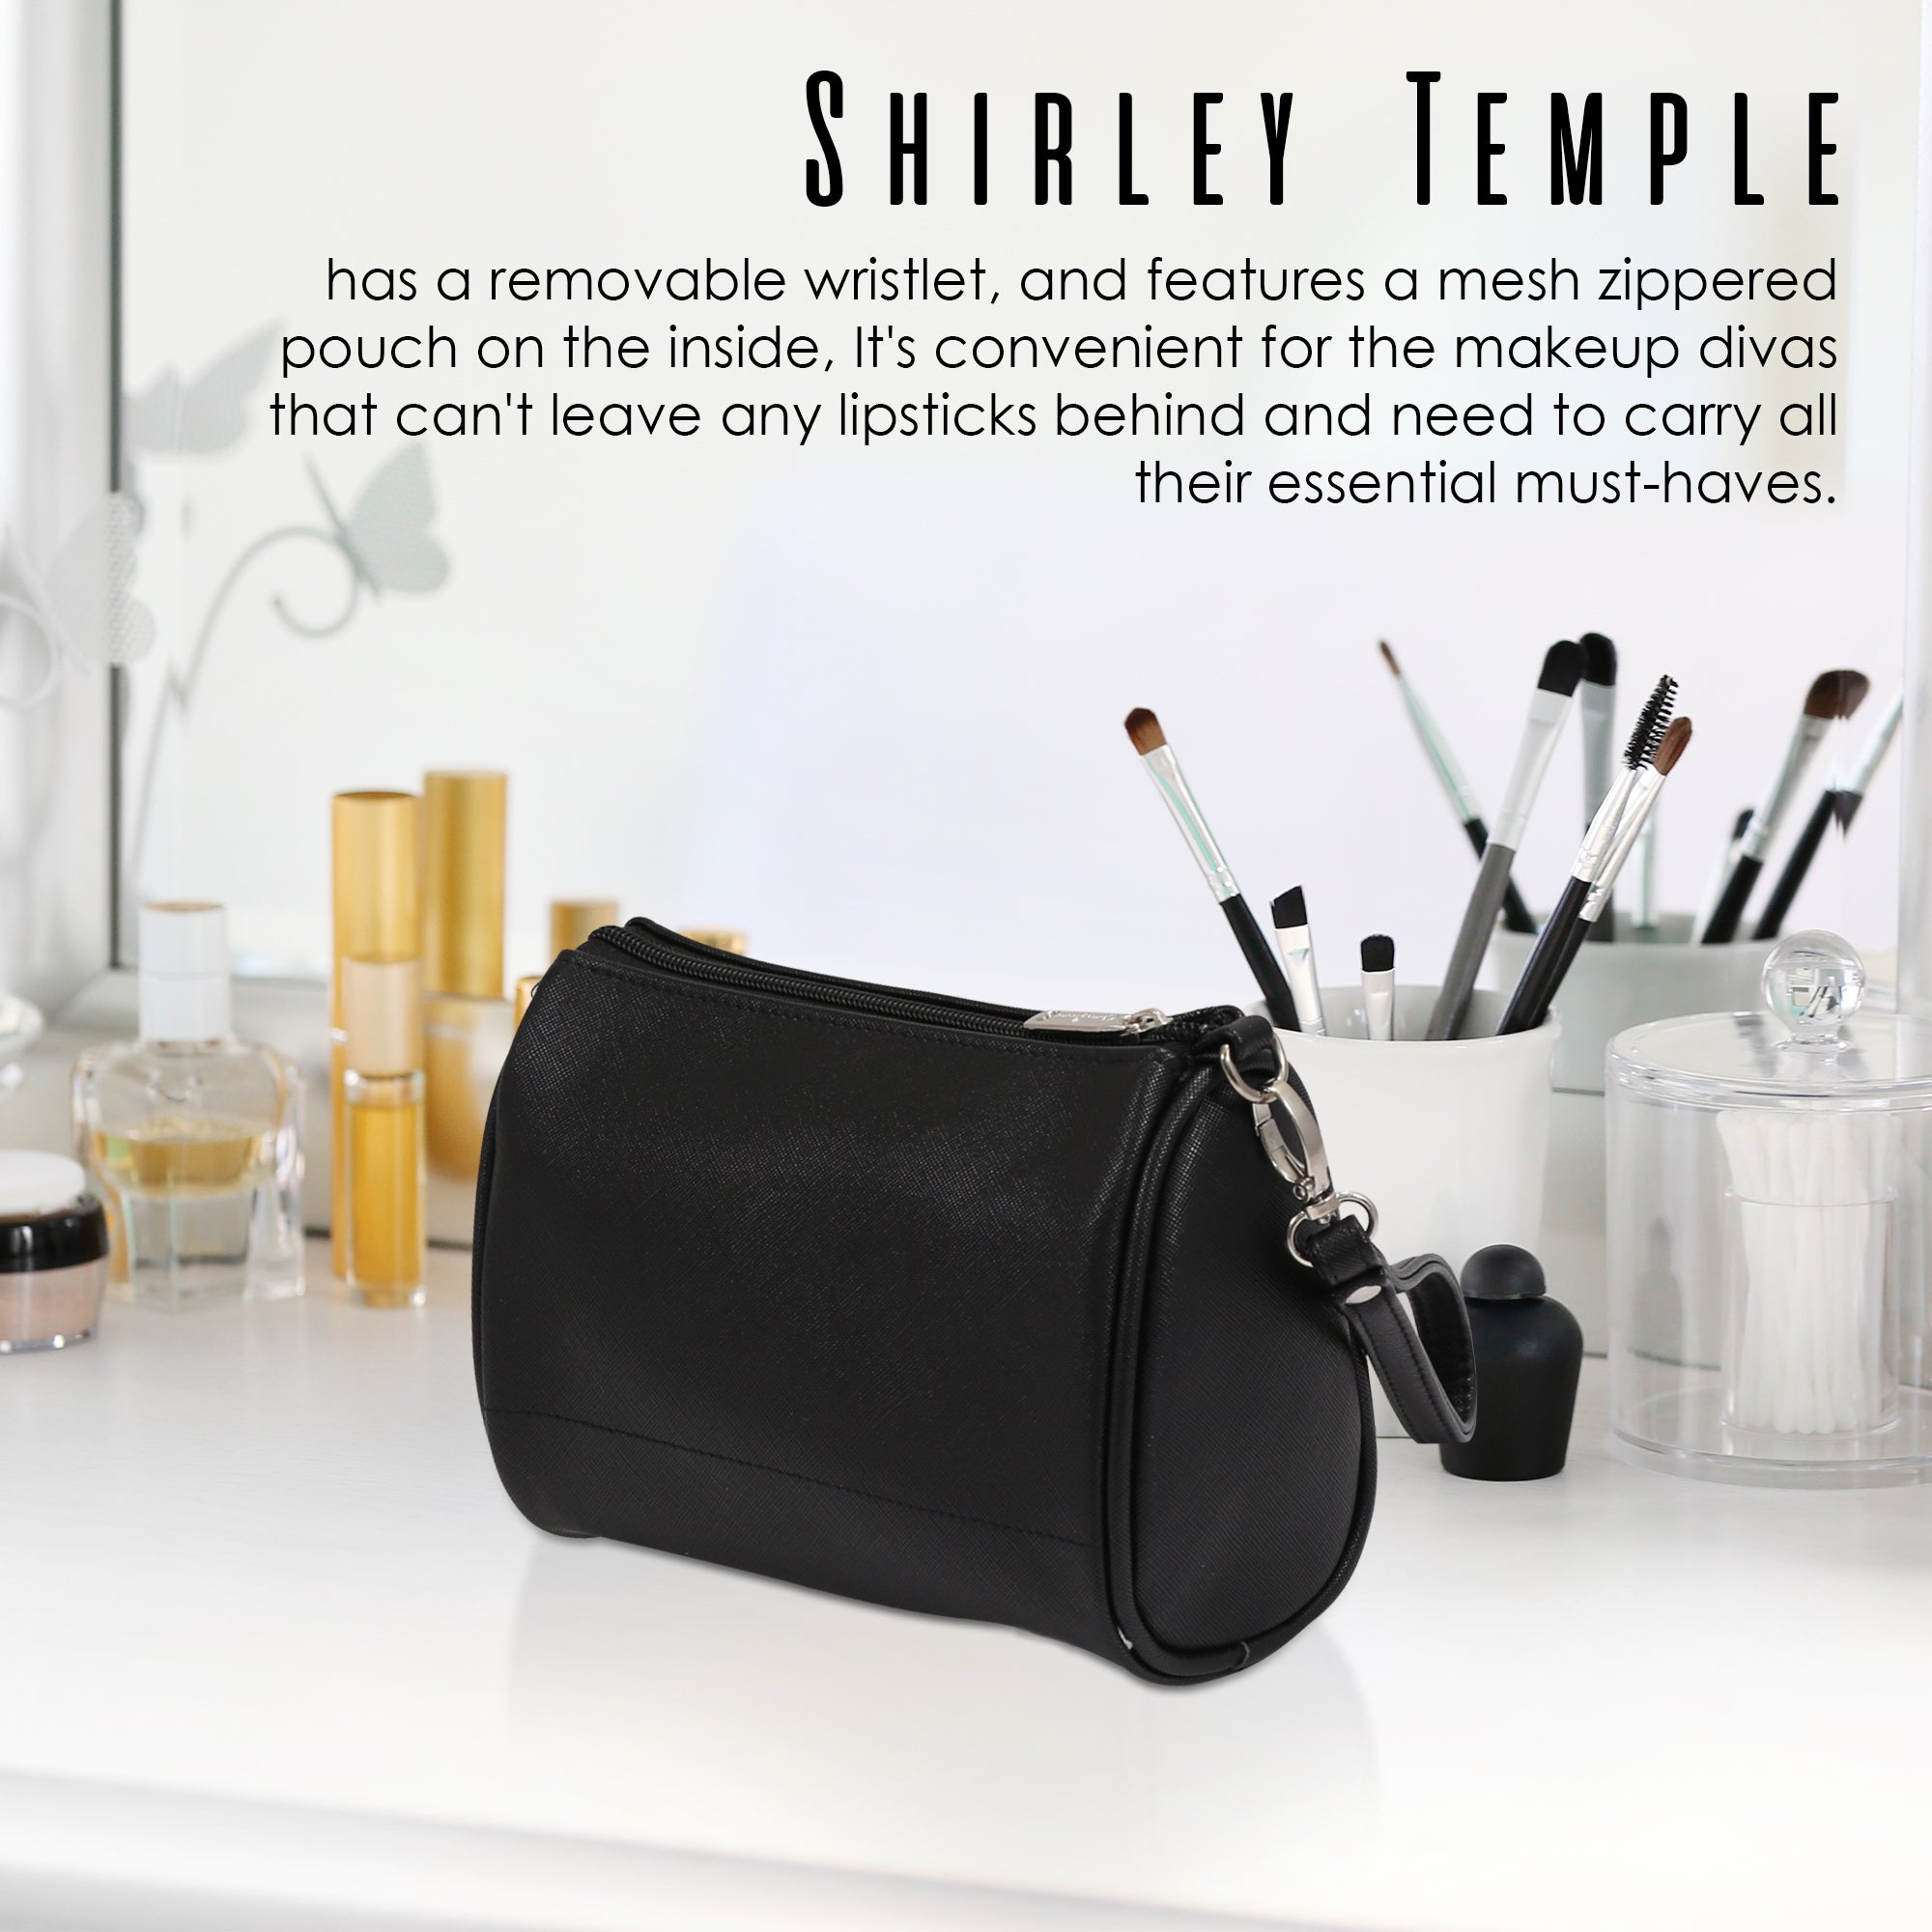 Temple illustration - White Tote Bag - Frankly Wearing